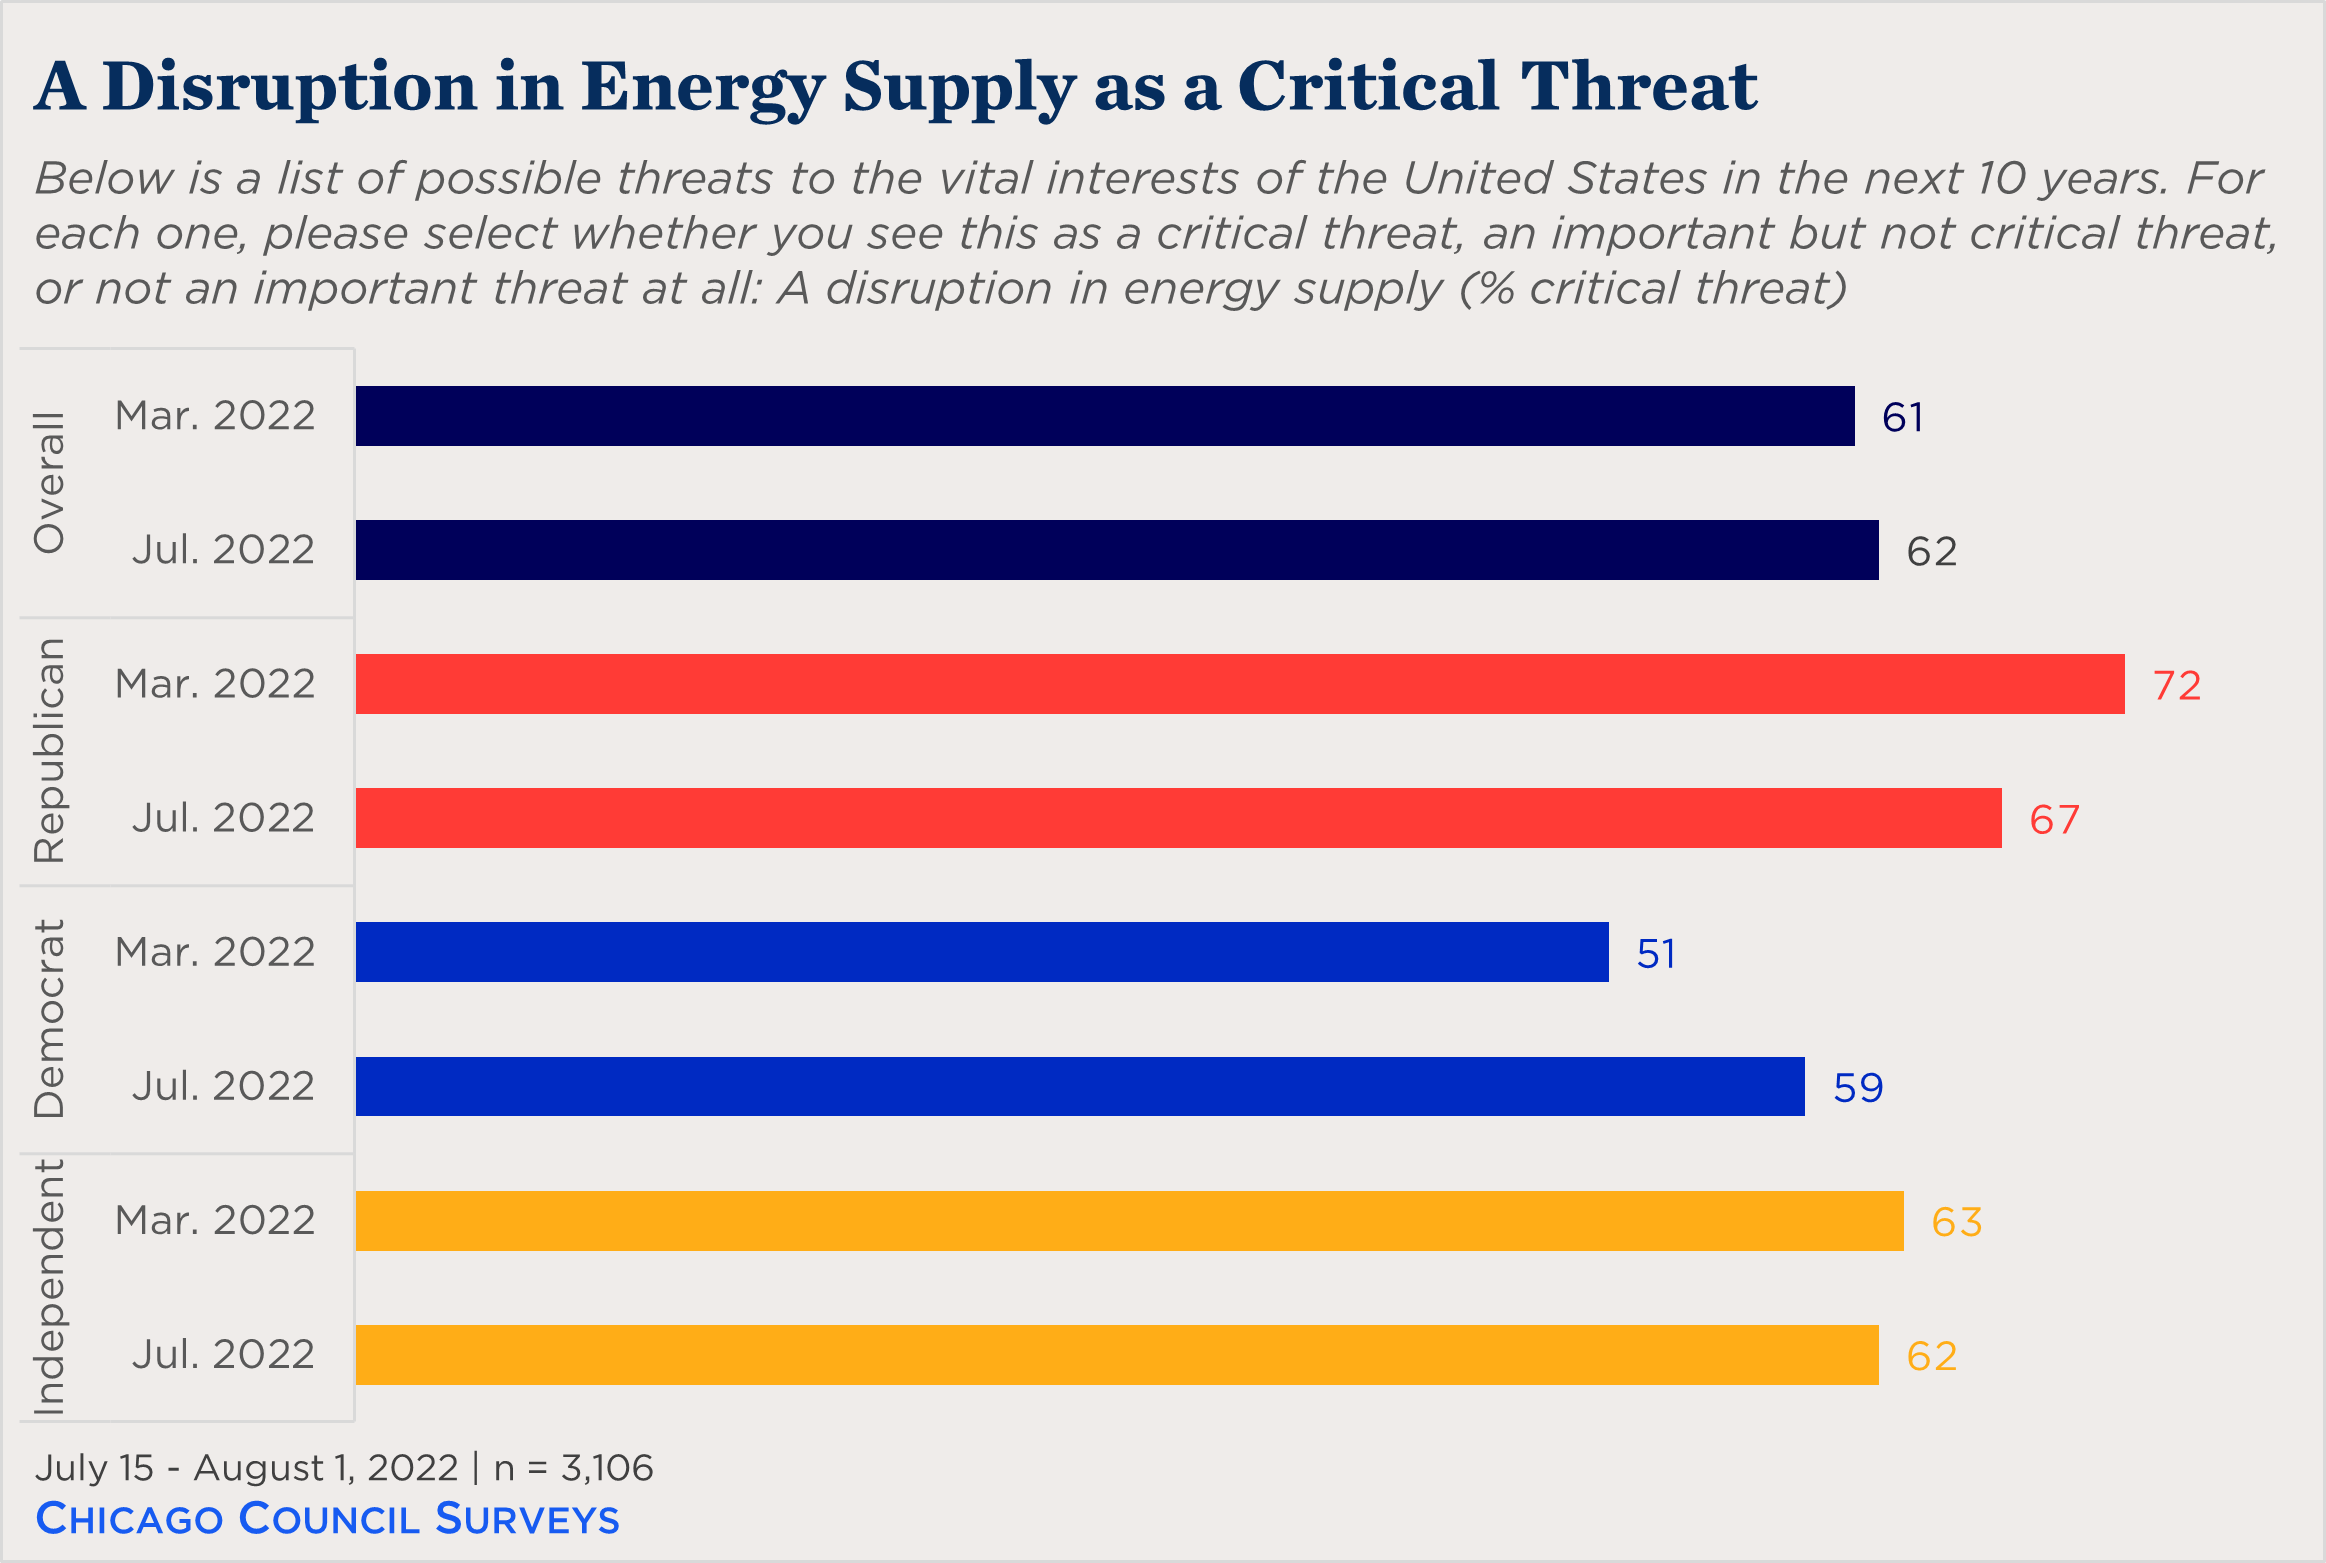 bar chart showing partisan views of energy supply disruption as a critical threat